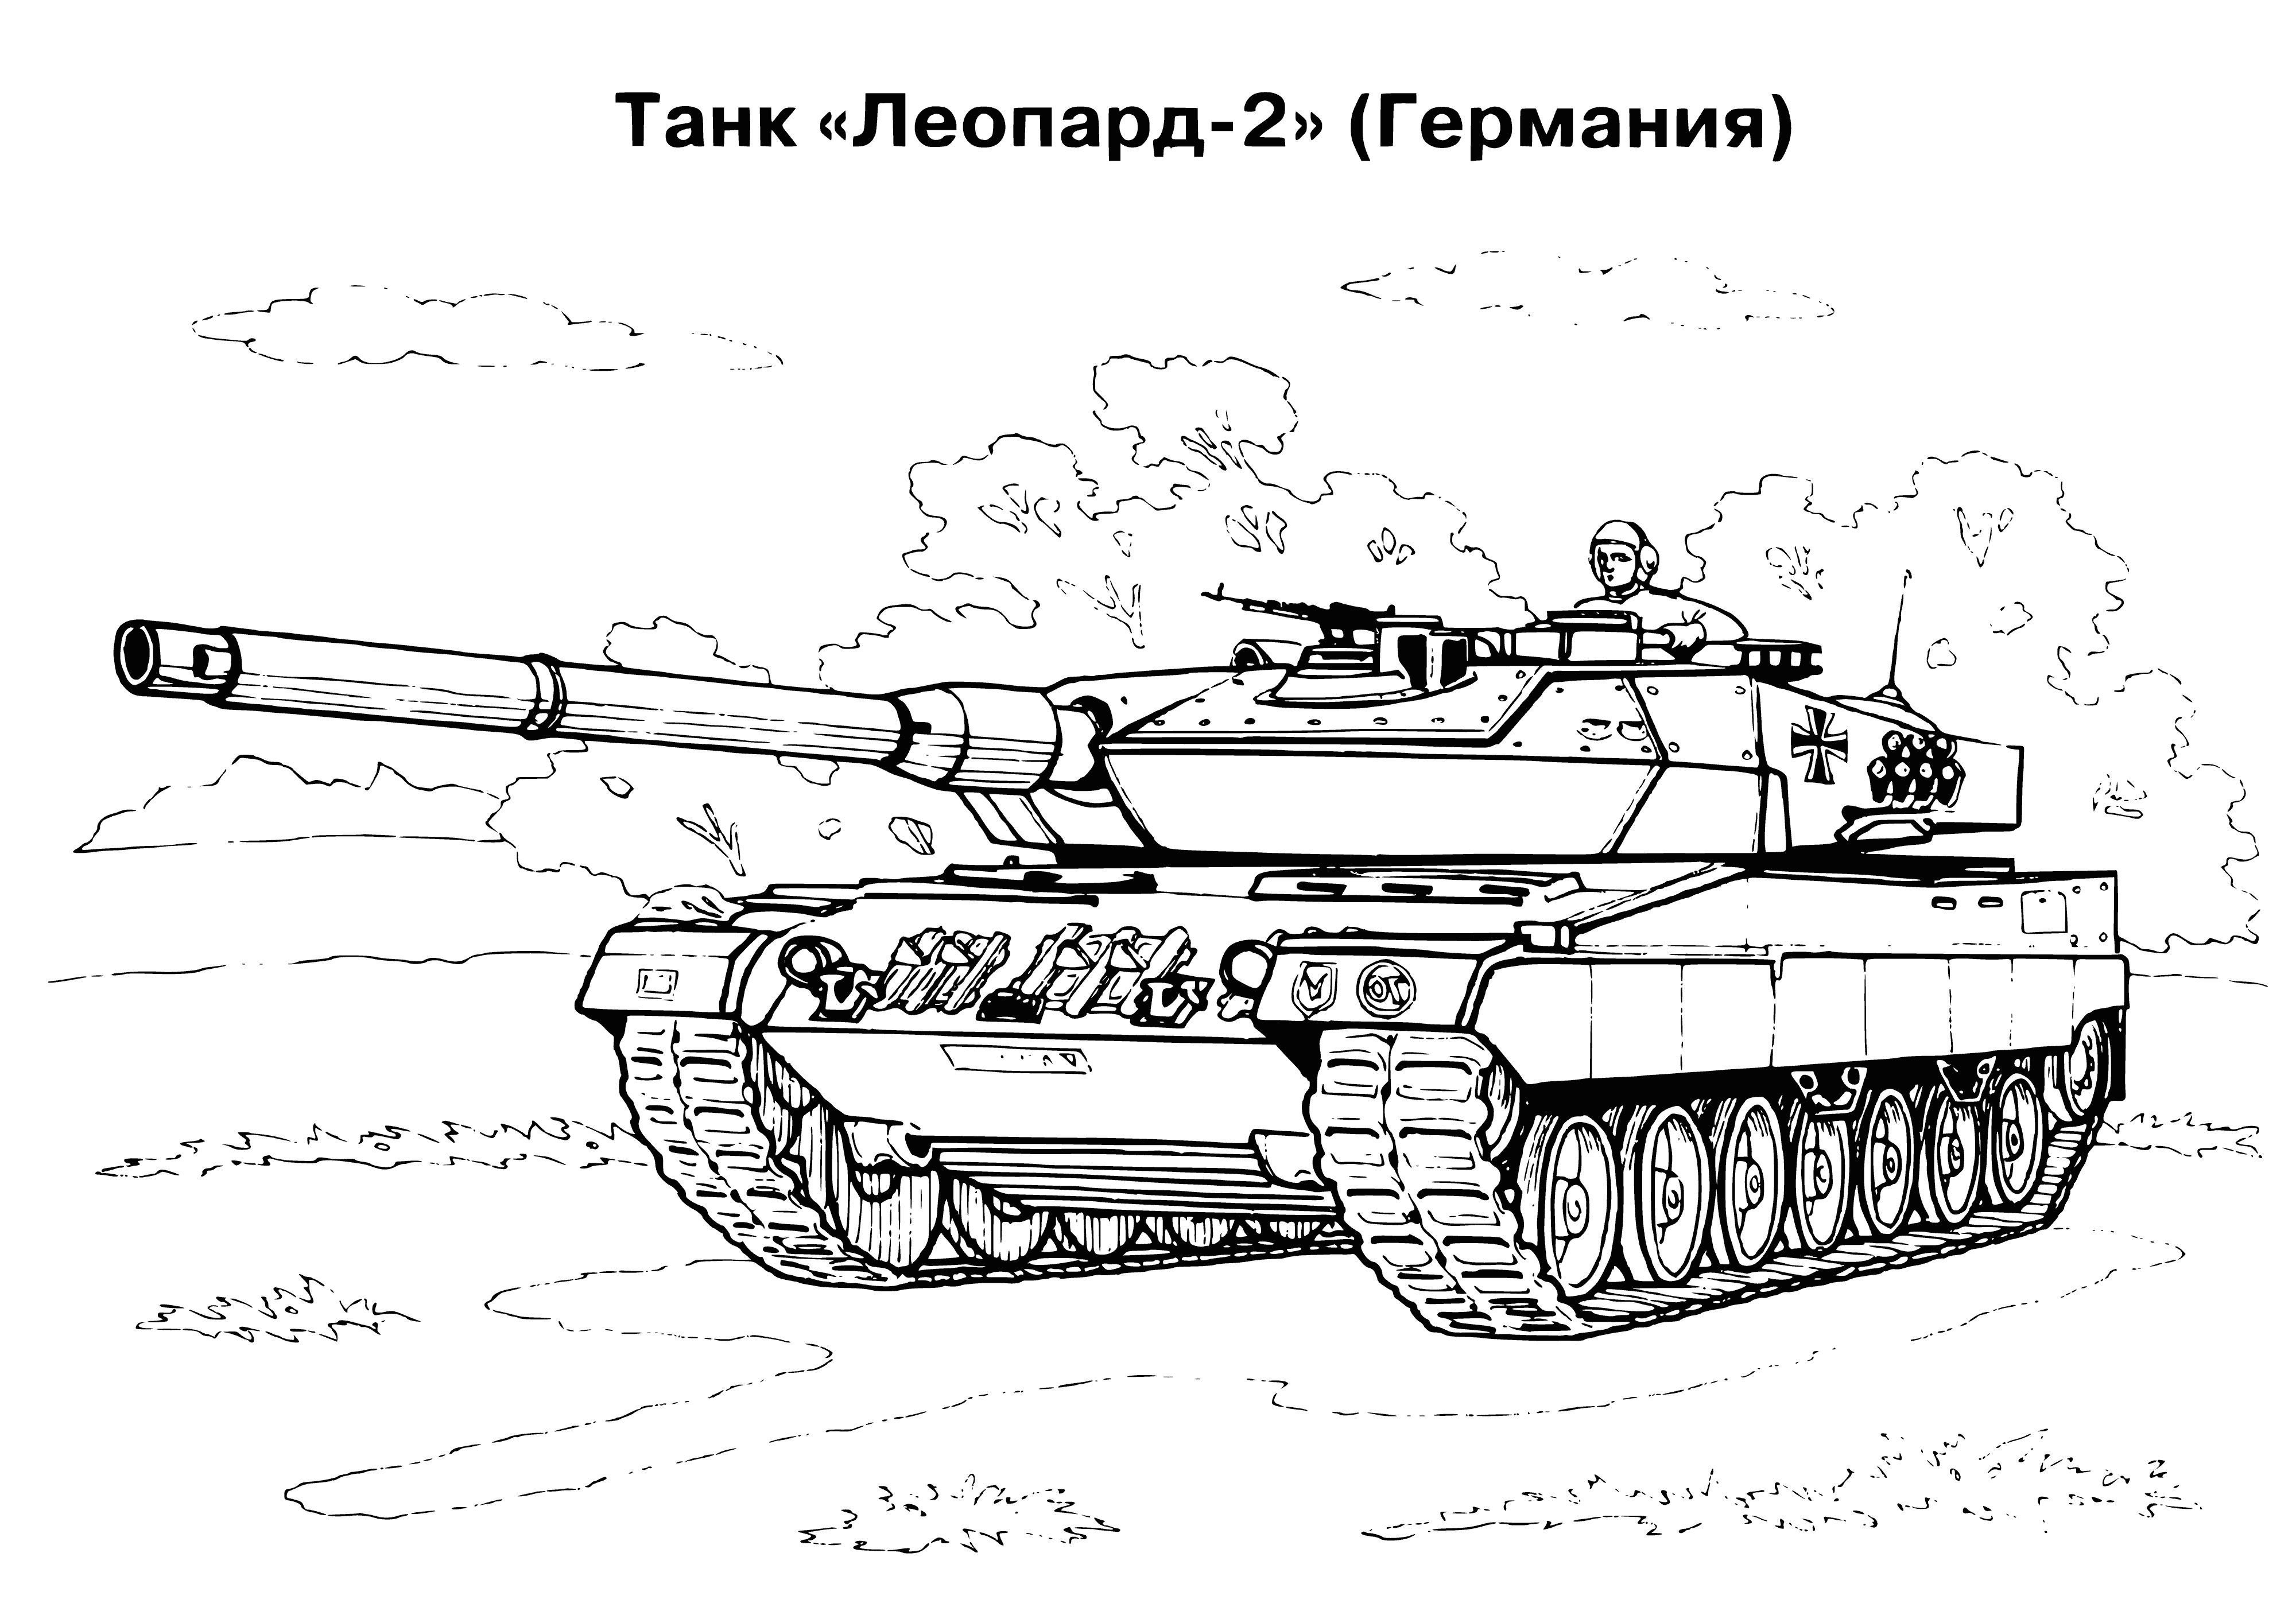 coloring page: Large gray tank w/turret & cannon, several small round hatches, treads on tracks moving forward.